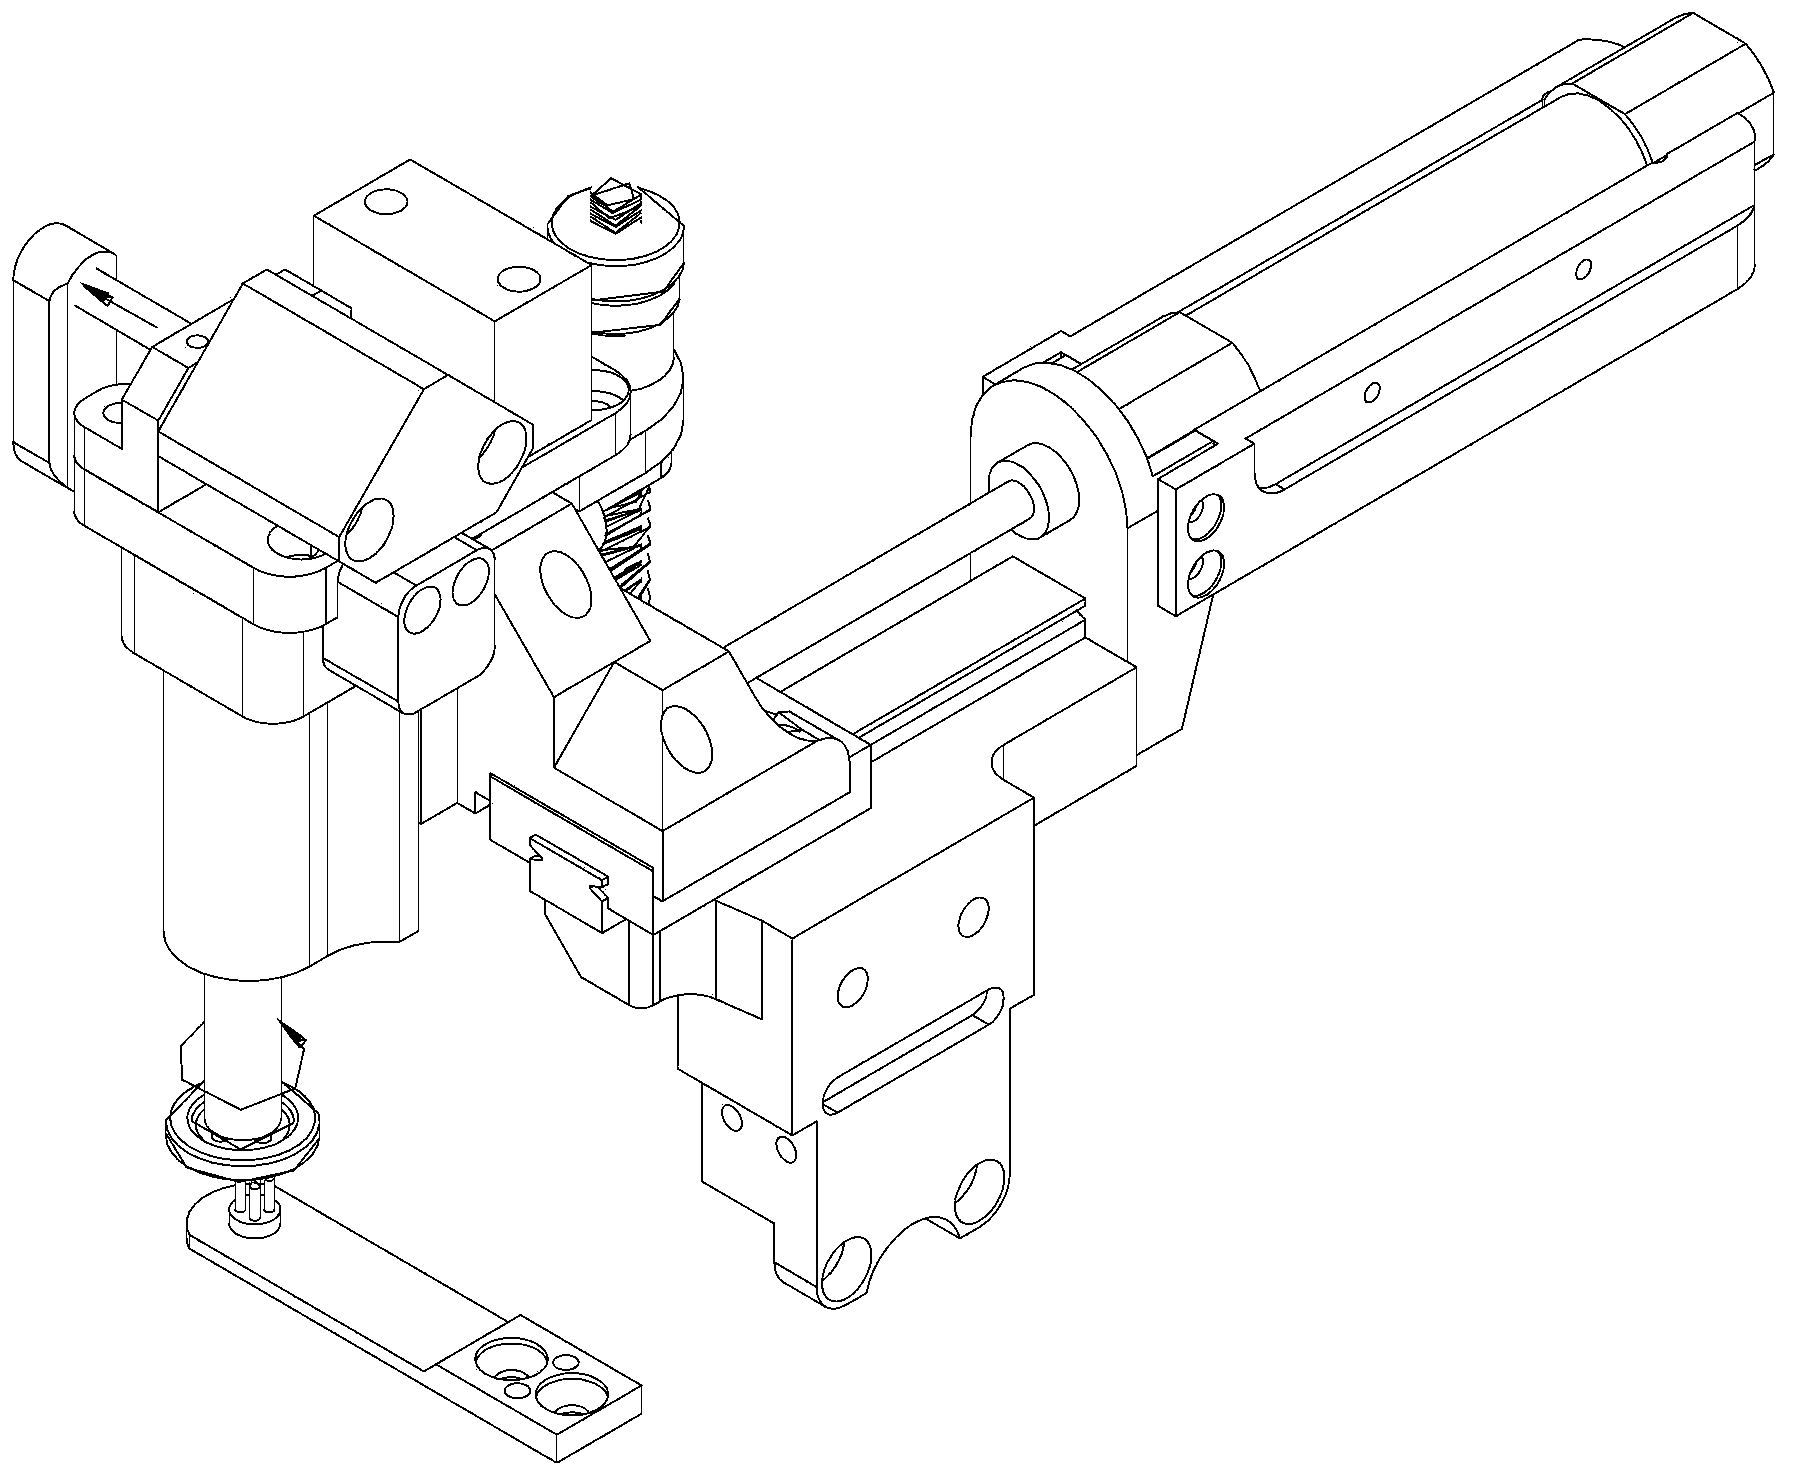 Button translation and rotation improvement mechanism for button sewing machine tool